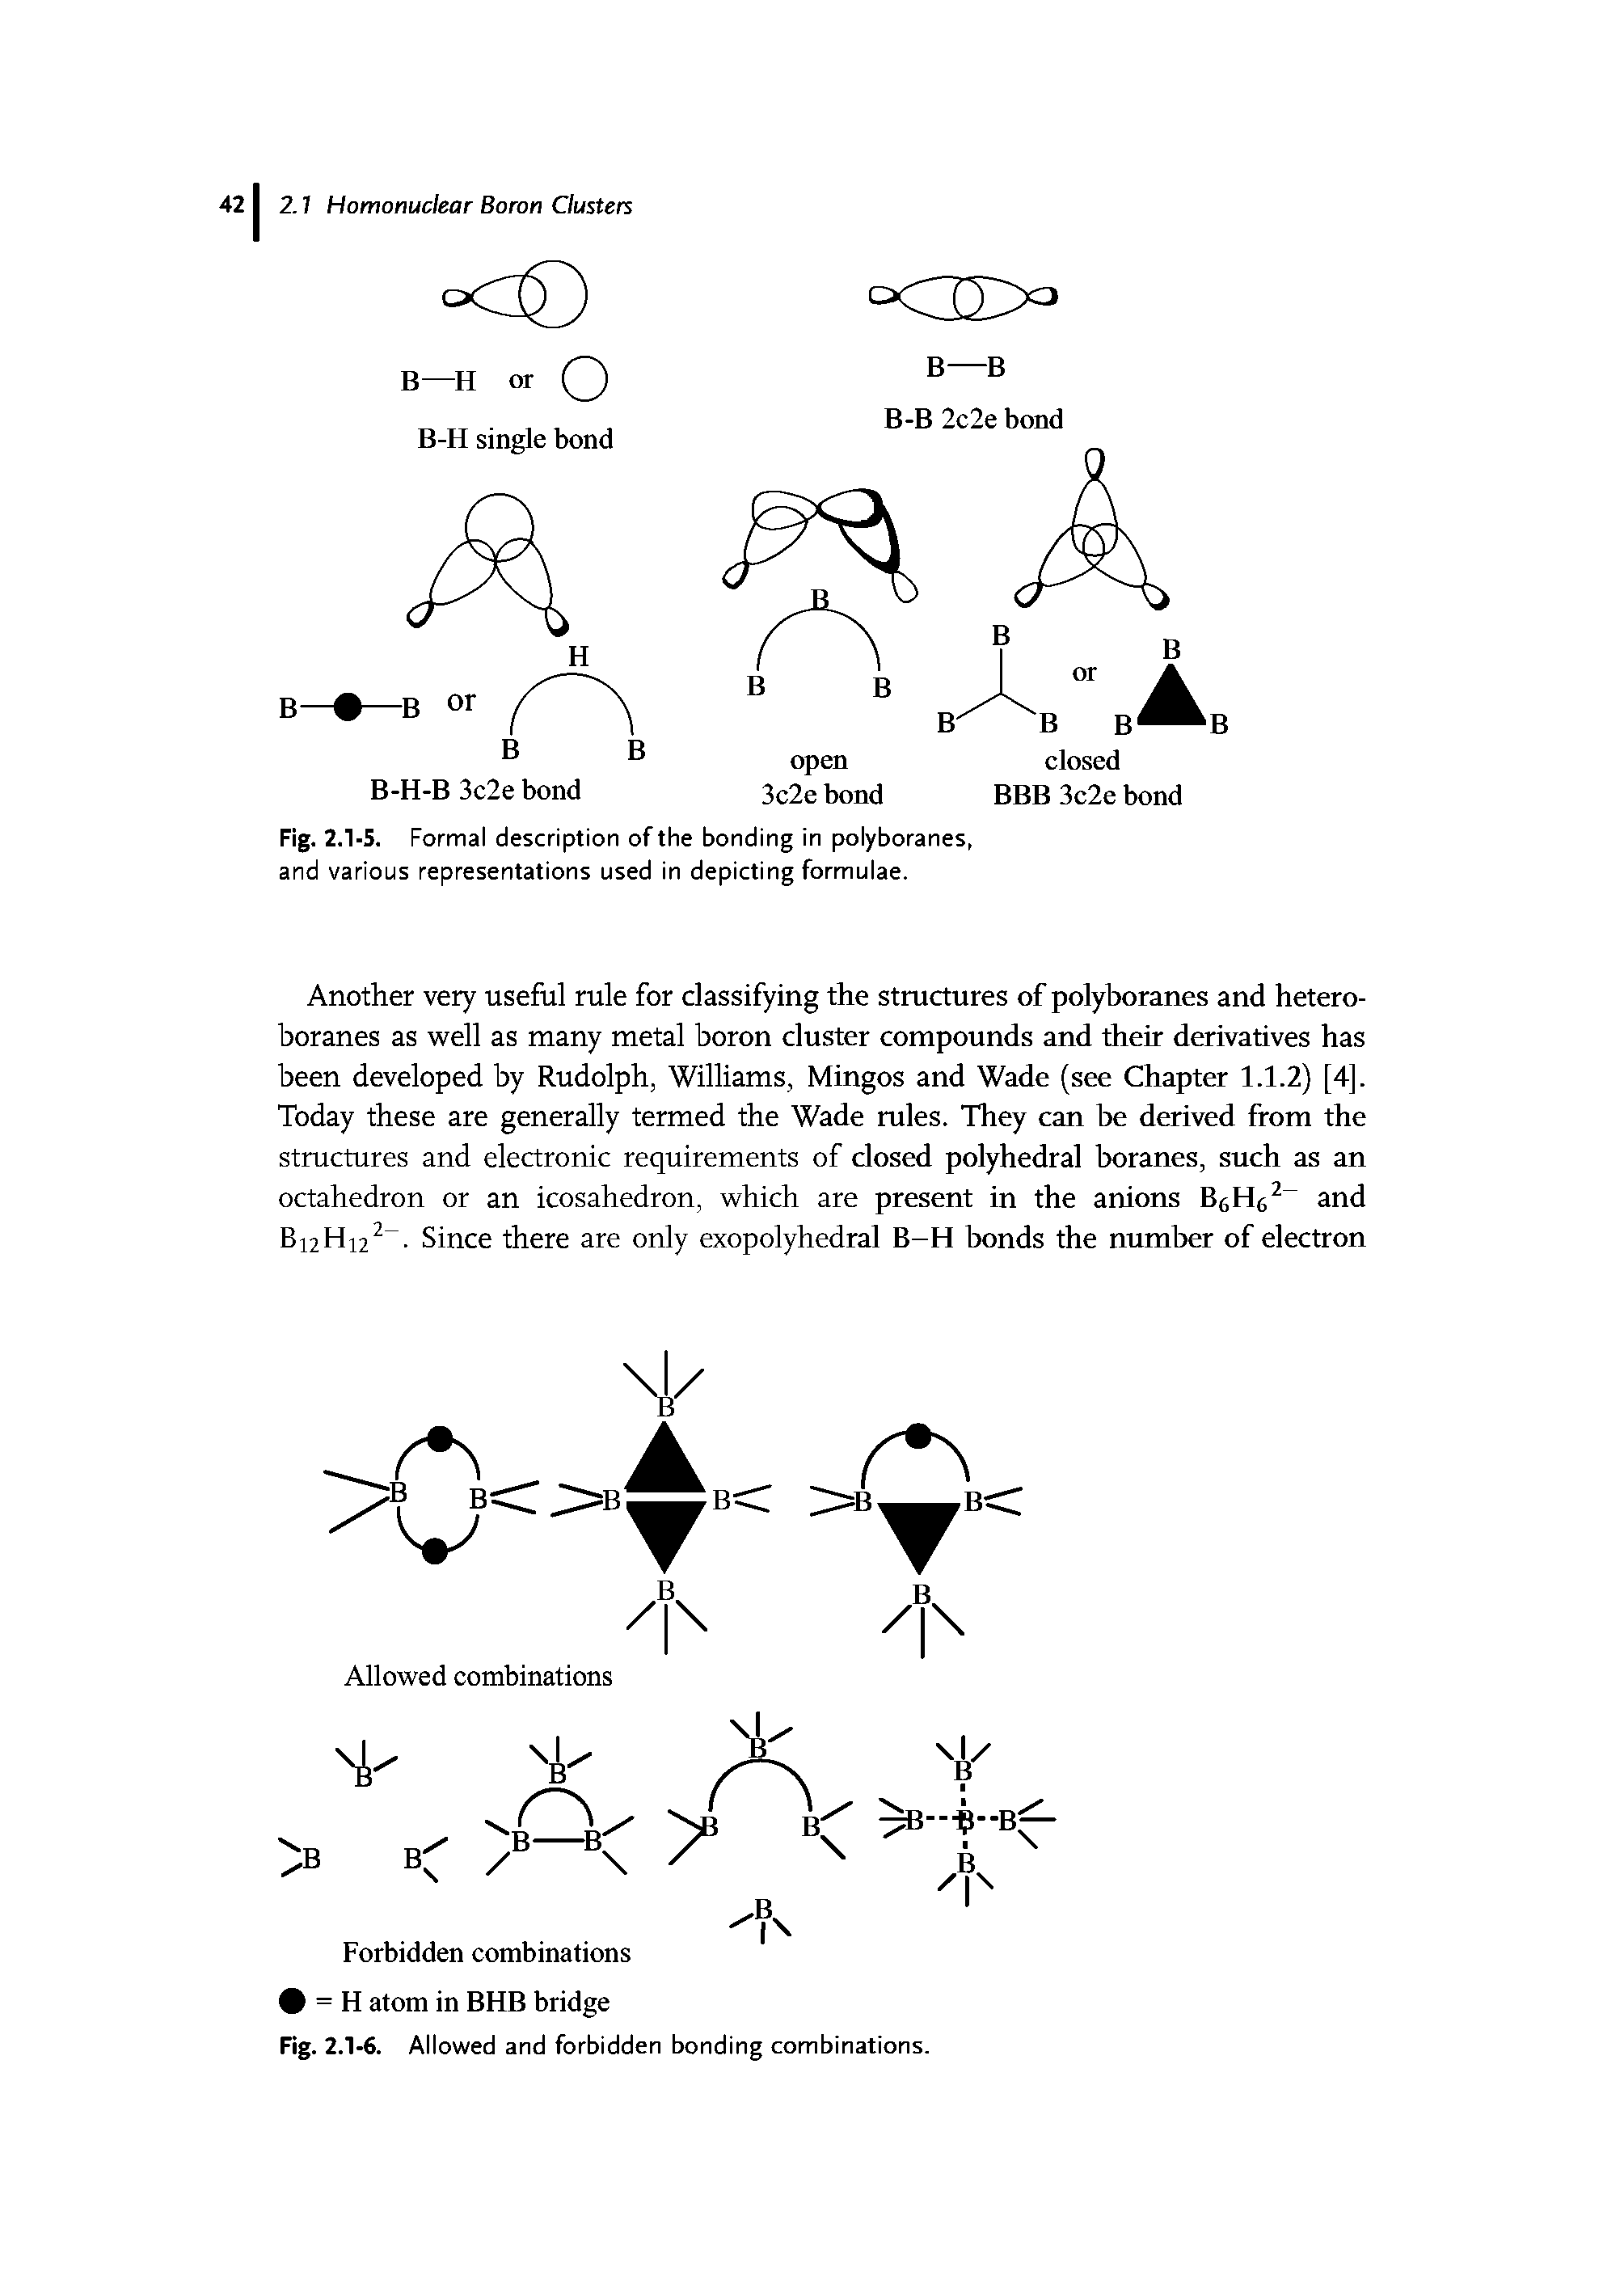 Fig. 2.1-5. Formal description of the bonding in polyboranes, and various representations used in depicting formulae.